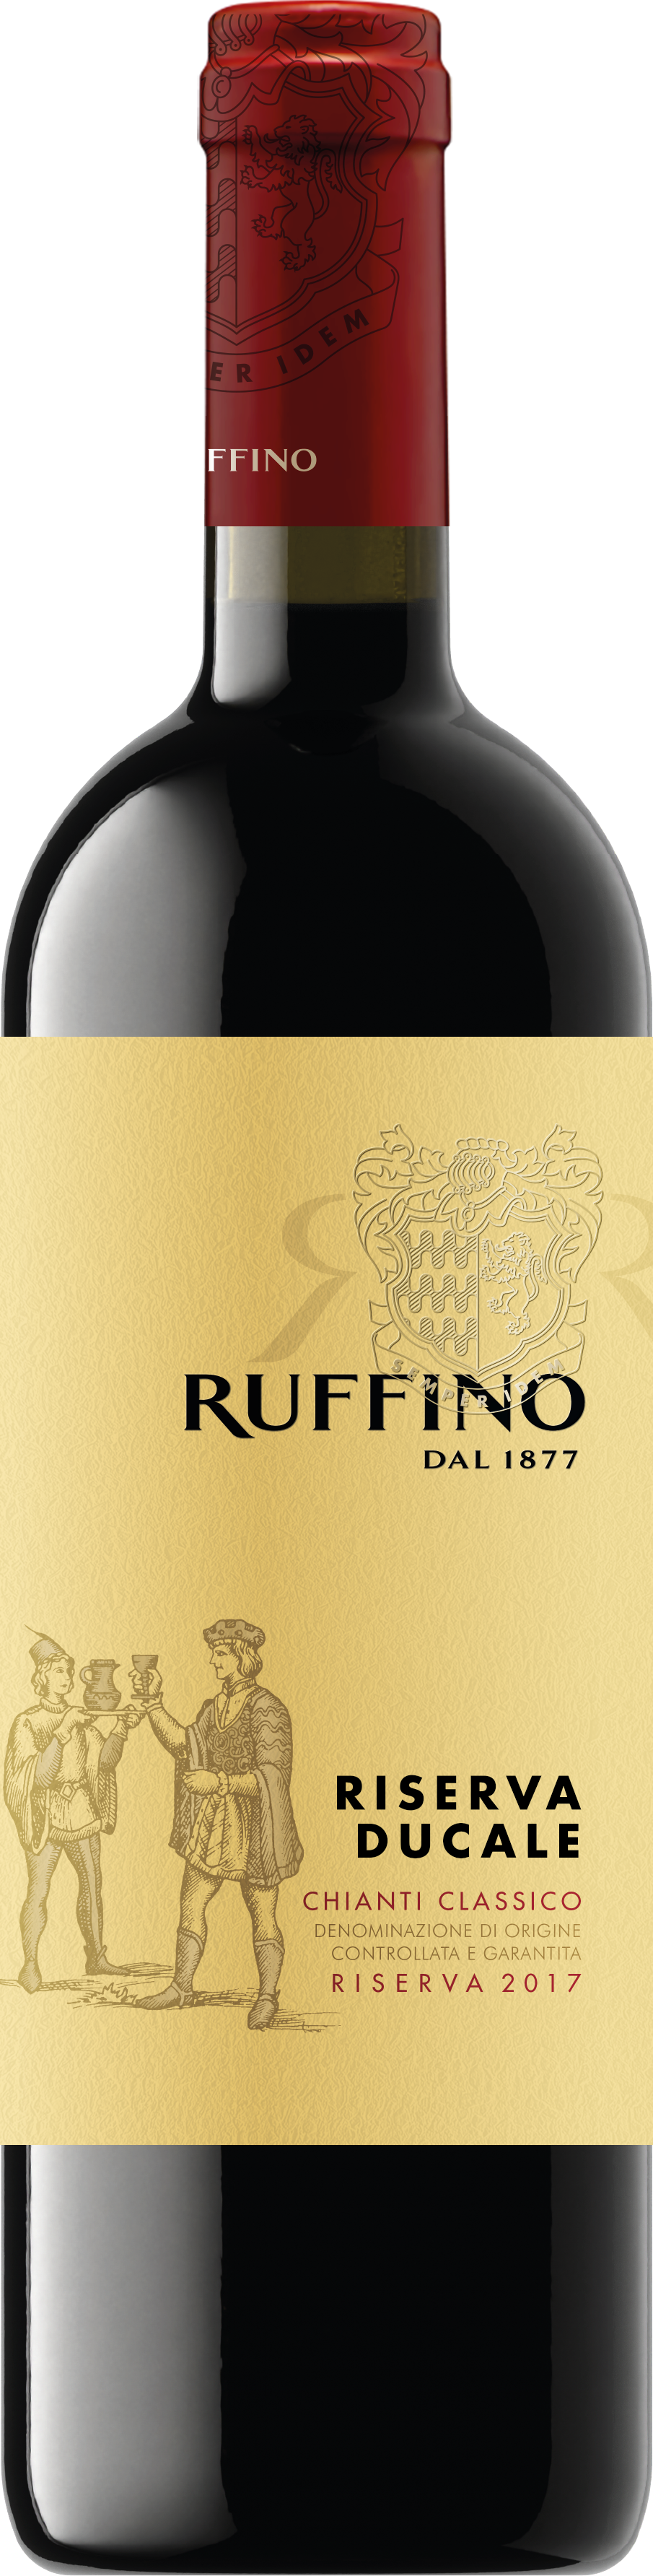 Ruffino revamps image with new wine labels and logo